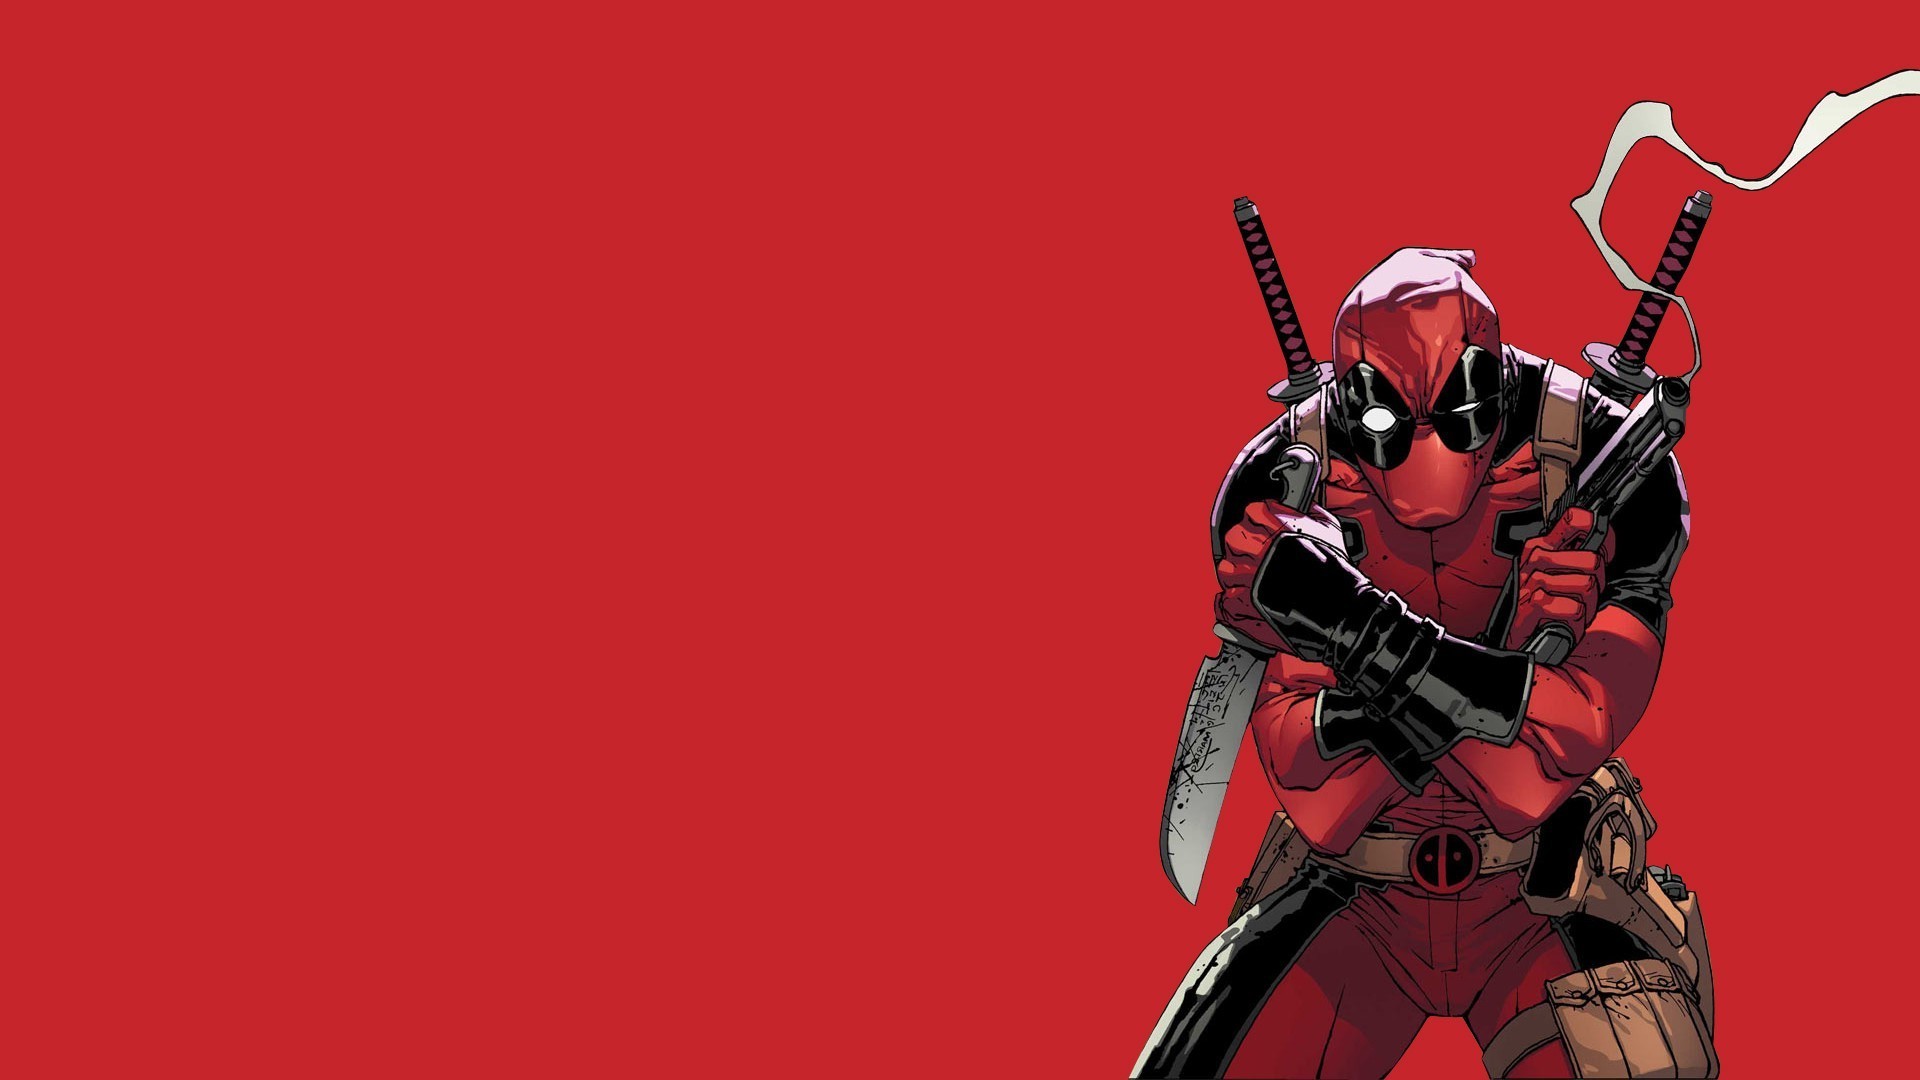 1920x1080 Deadpool Wallpapers HD Desktop and Mobile Backgrounds nVadGZae